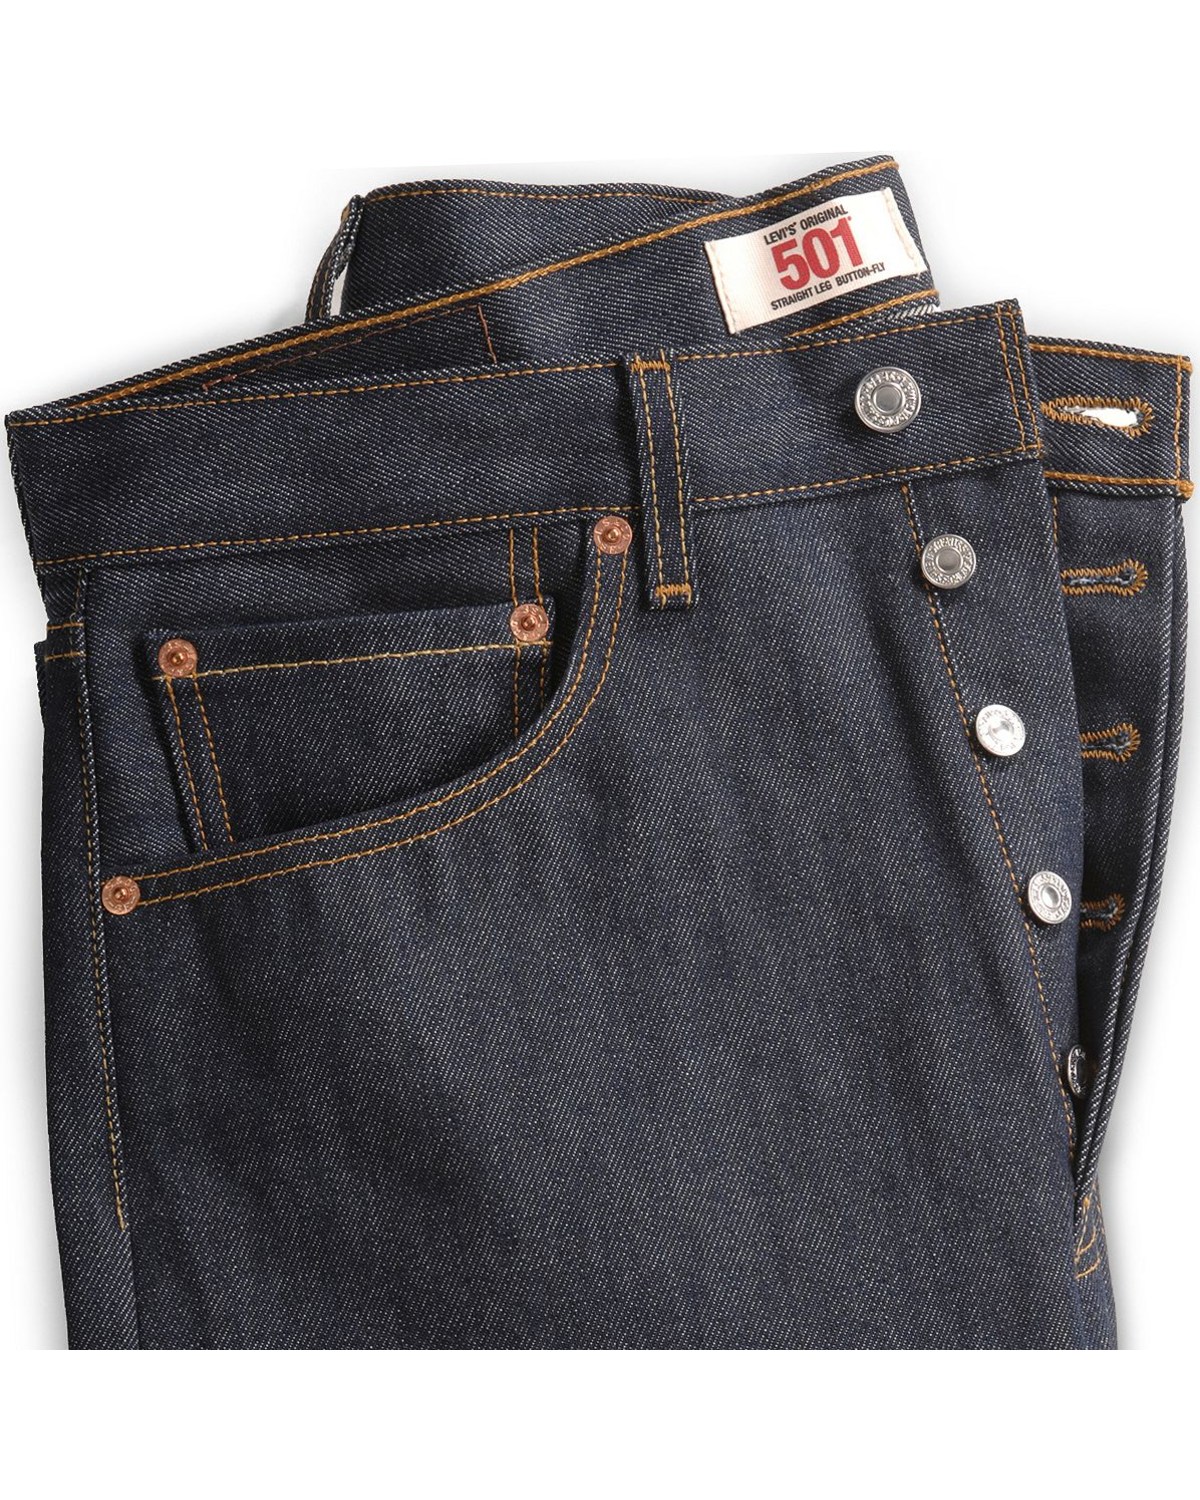 levi-s-501-jeans-original-shrink-to-fit-boot-barn